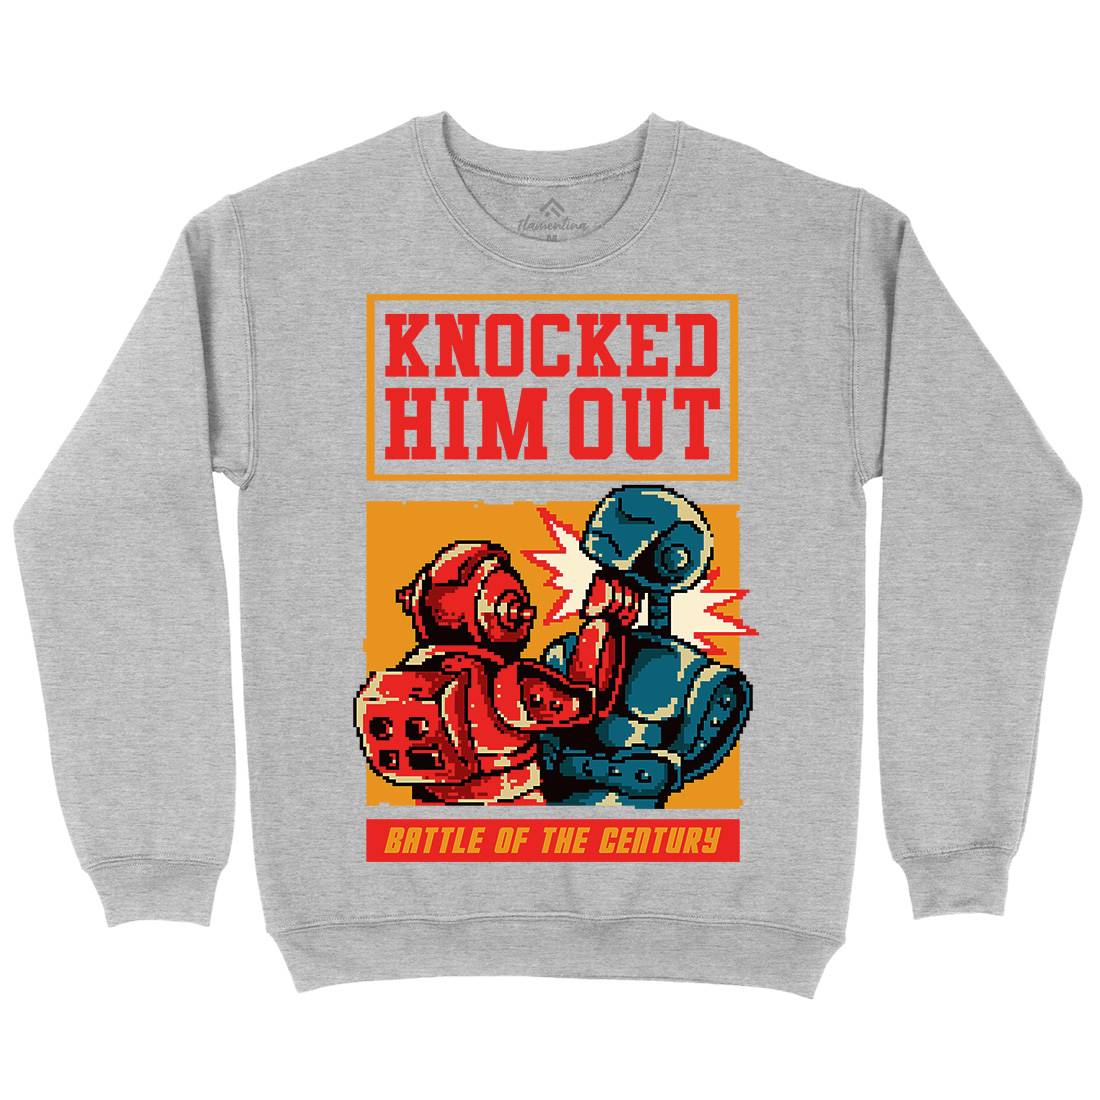 Knocked Him Out Mens Crew Neck Sweatshirt Space B923